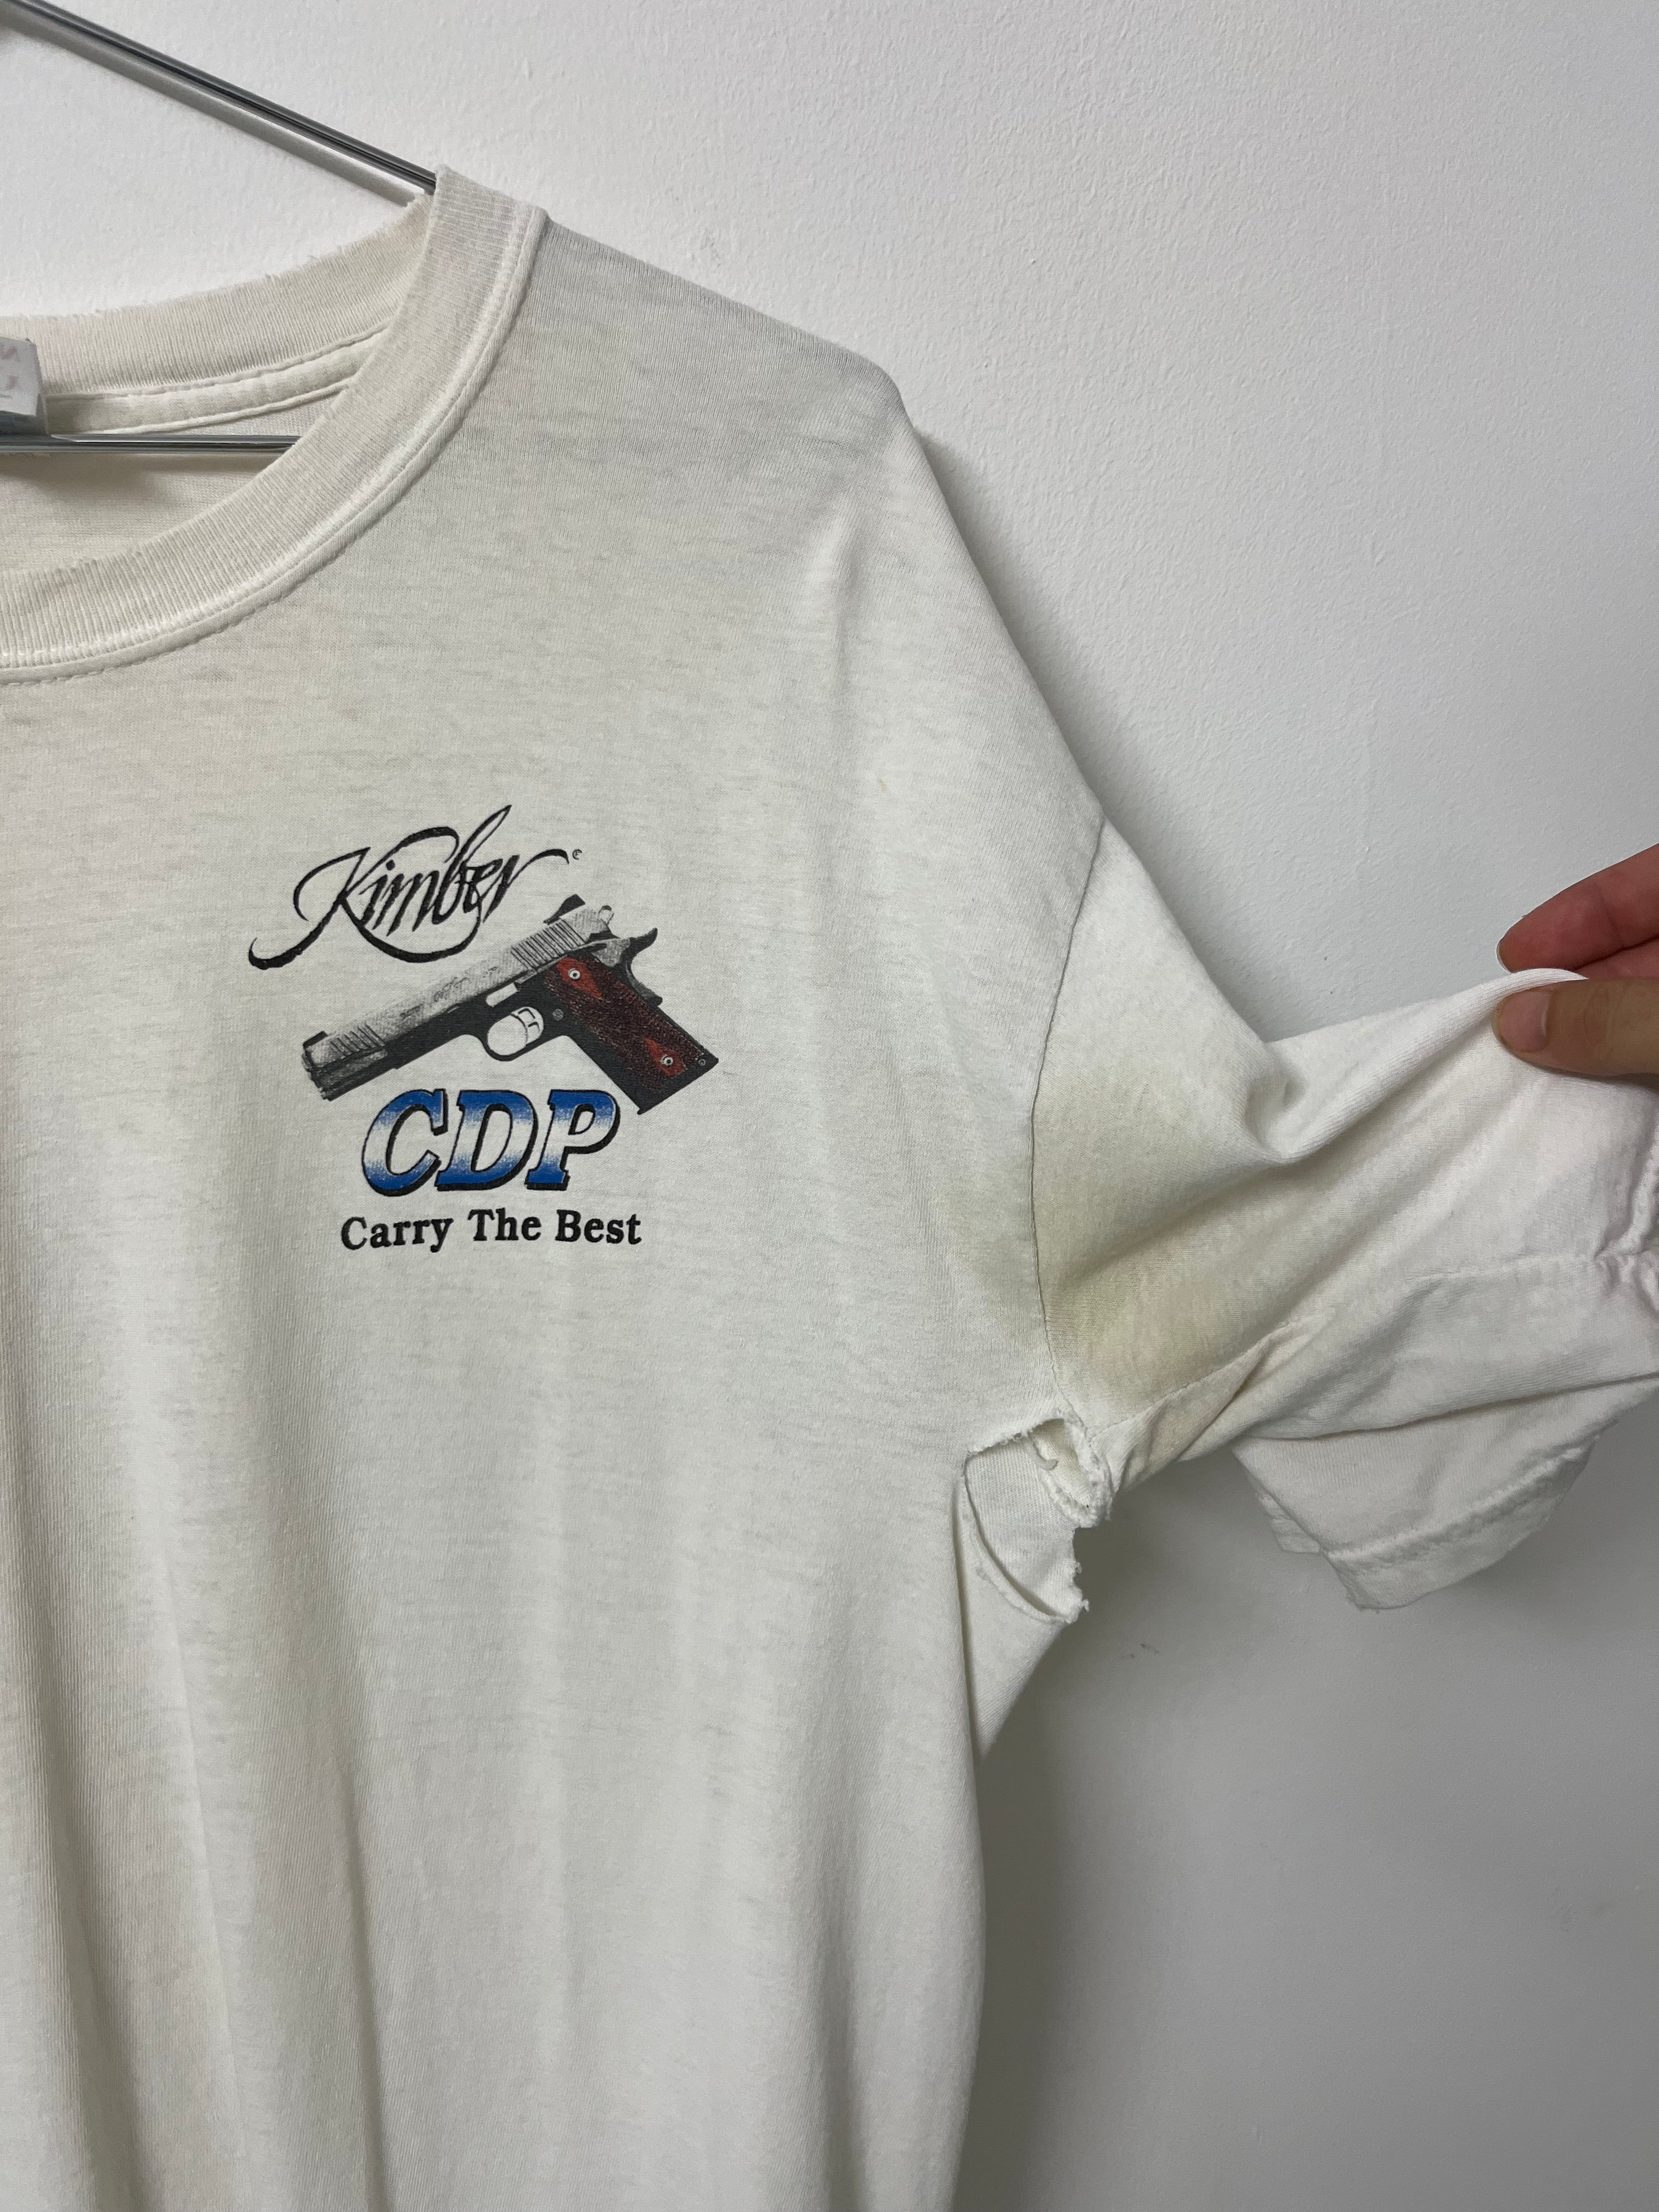 1990s Kimber CDP ‘Carry the Best’ Gun Distressed T-Shirt - Aged White - L/XL